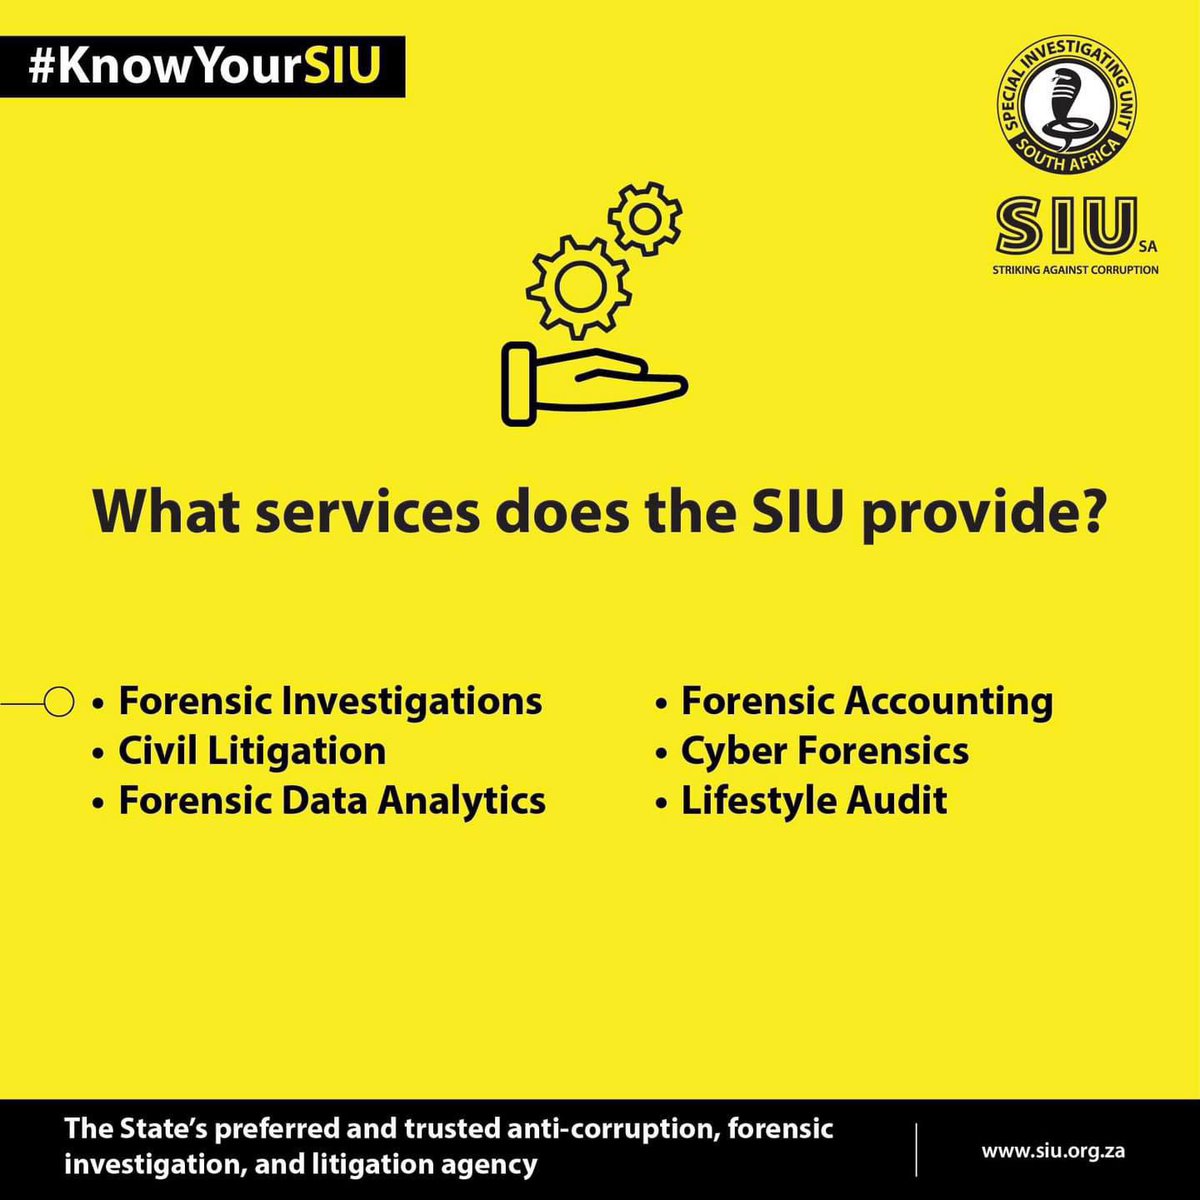 #KnowYourSIU| The SIU aims to be the State’s preferred and trusted anti-corruption, forensic investigation and litigation agency. Here’s a list of expertise we provide for the State.